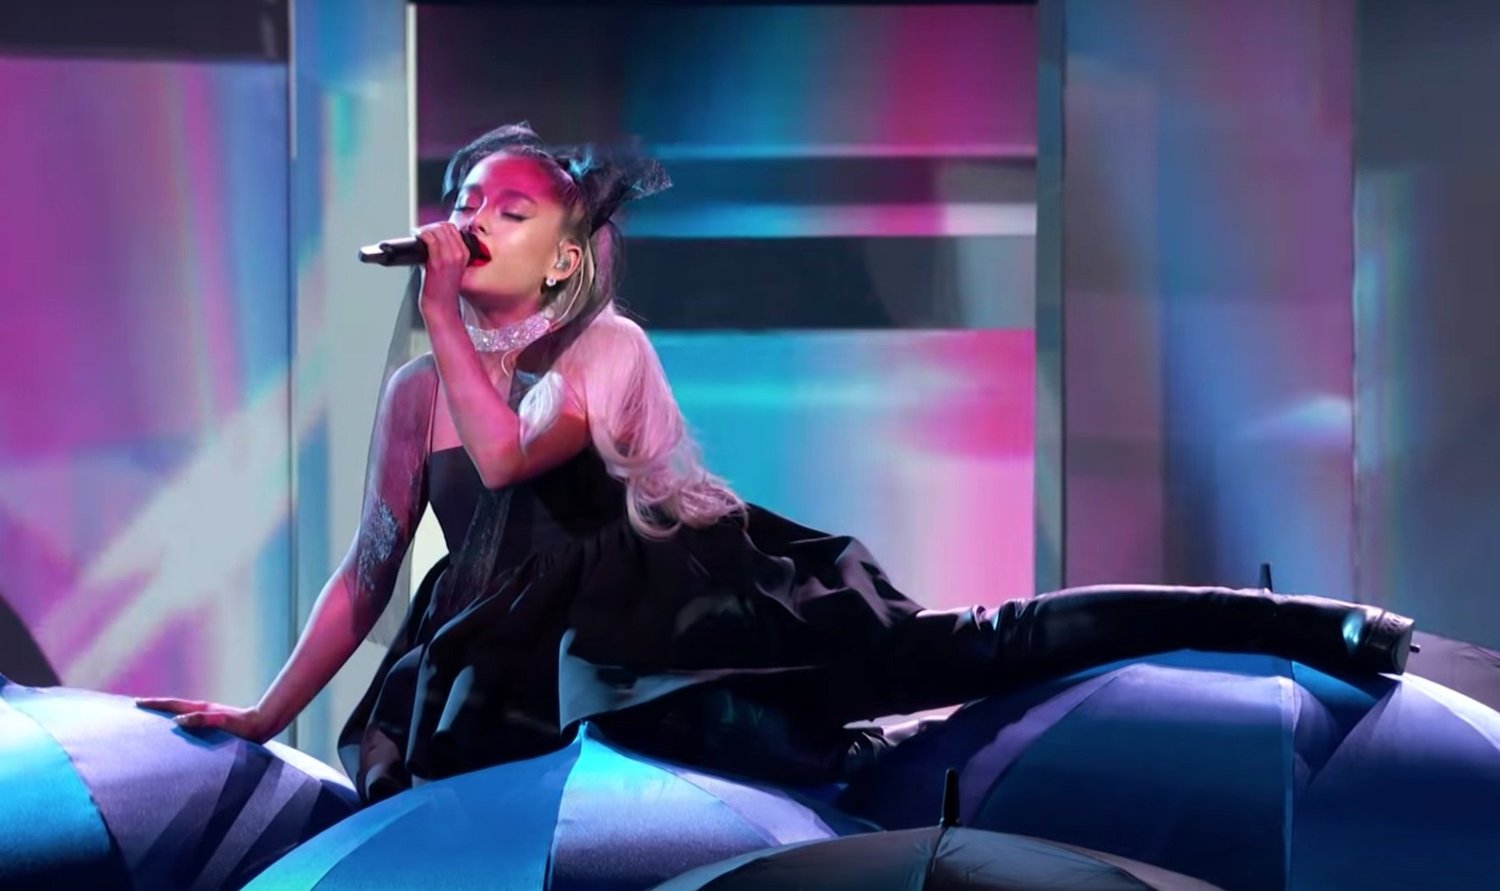 Video Watch Ariana Grande Perform No Tears Left To Cry At The 2018 Billboard Music Awards Video 8252